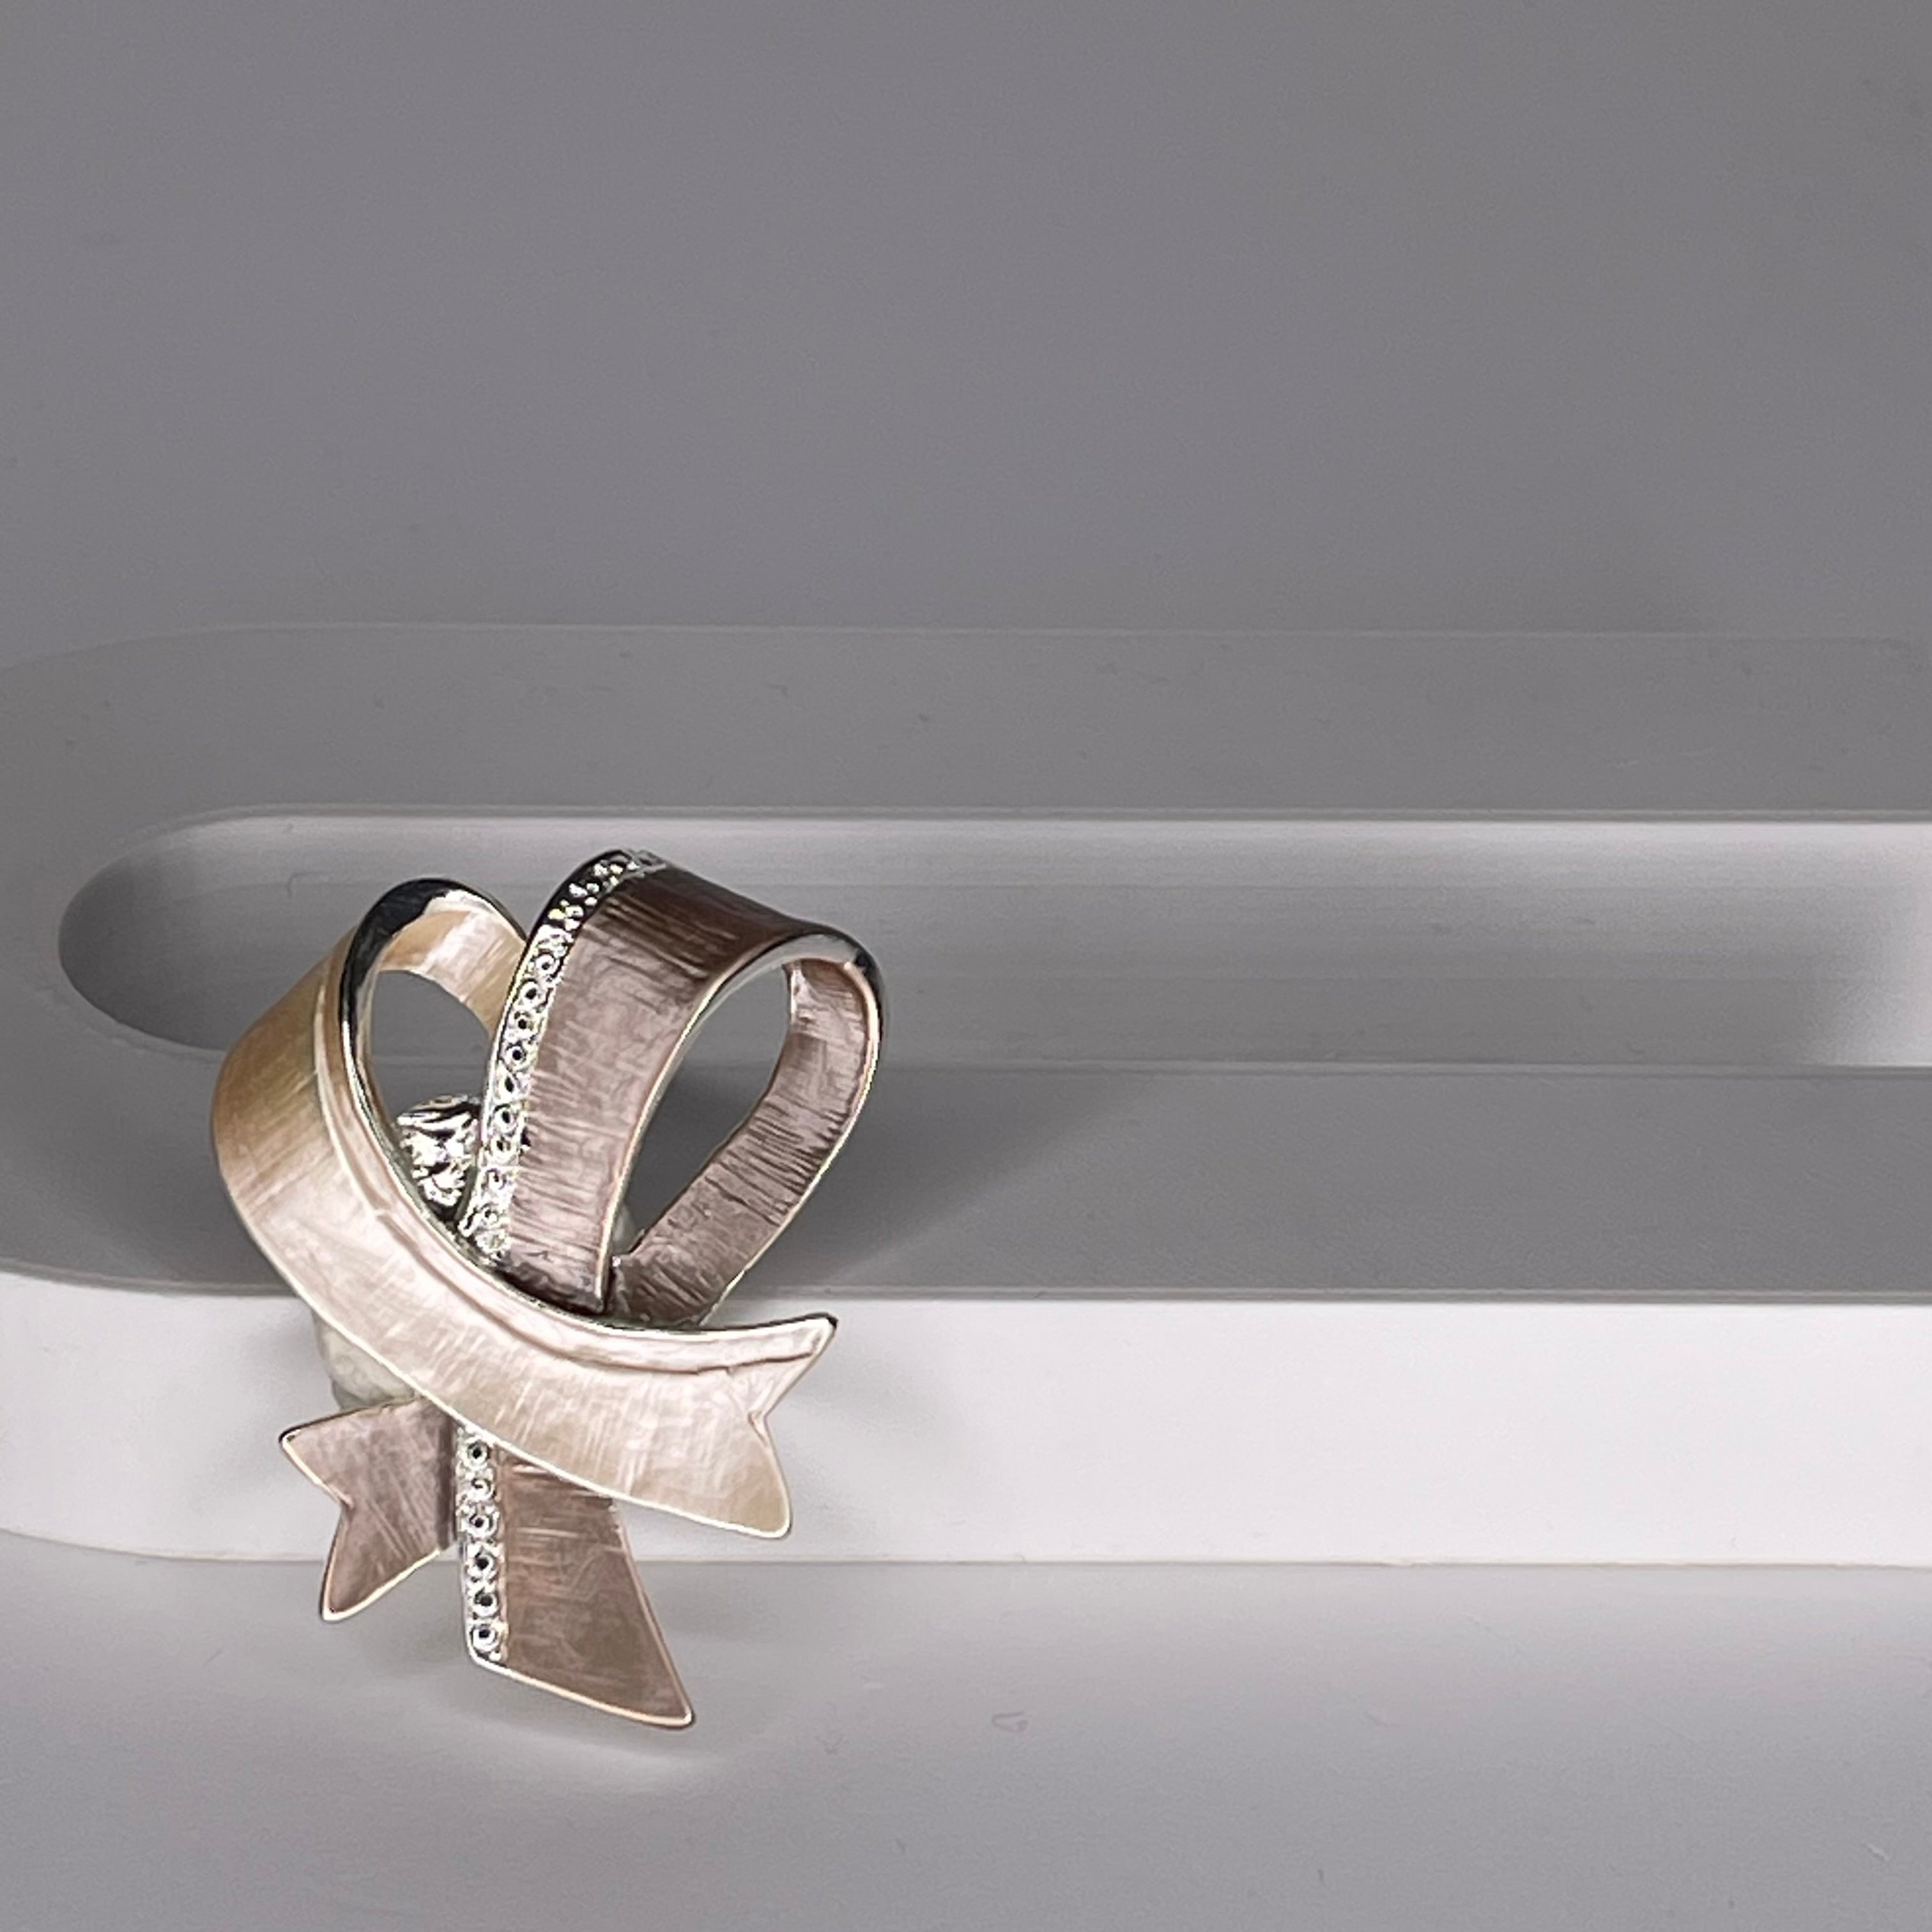 Magnetic brooch & scarf clip  - 'bow' design in shades of shiny silver, diamanté, oatmeal and champagne